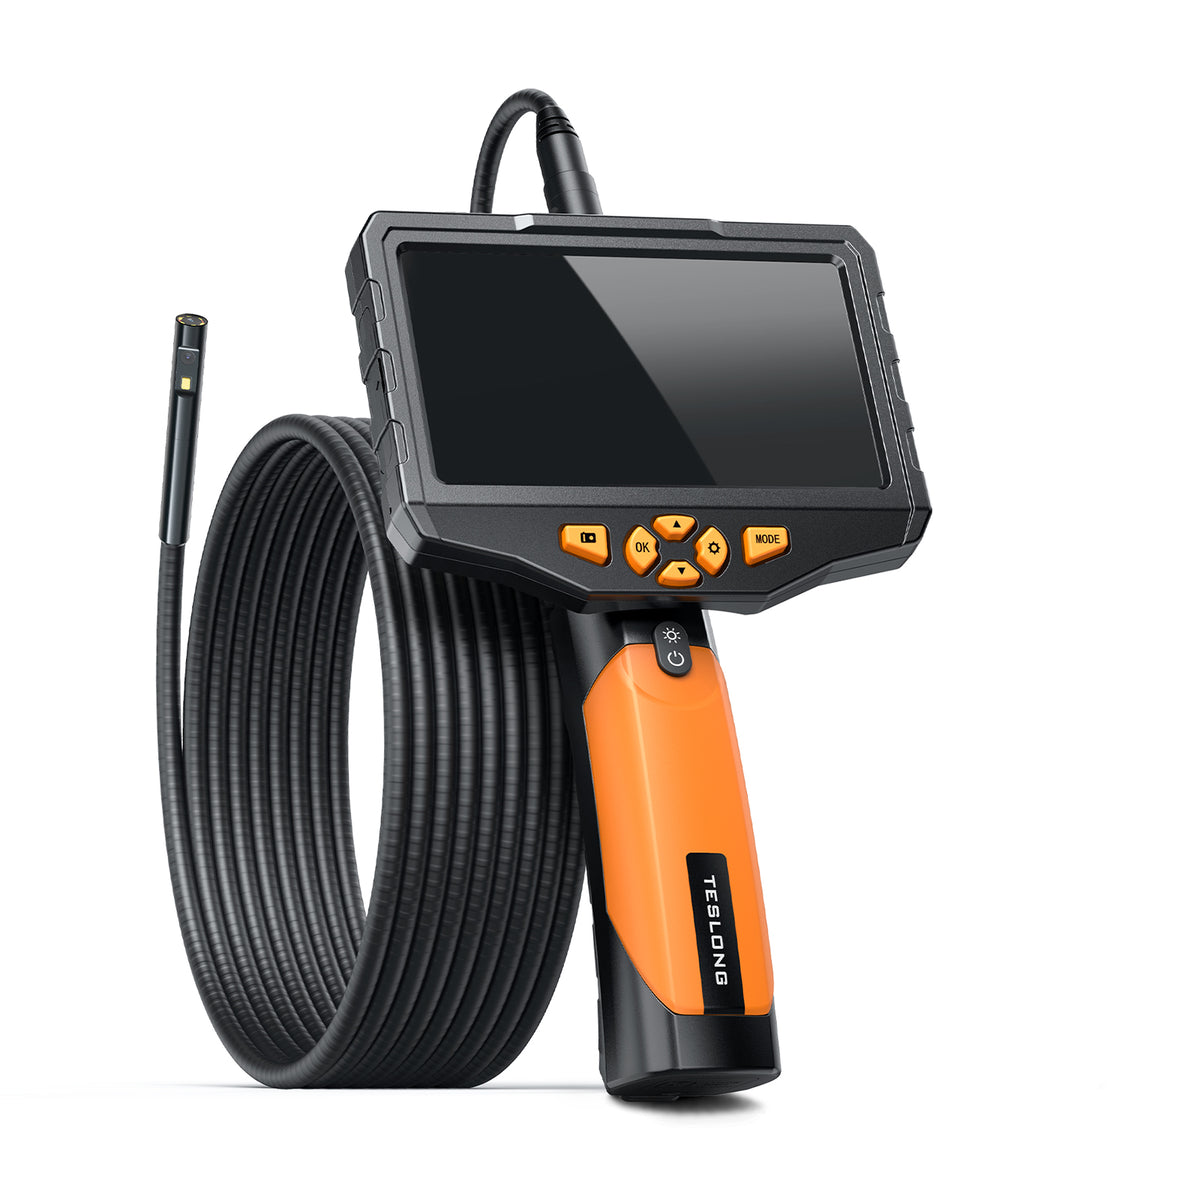 1200P WIFI Endoscope Camera IP67 Waterproof Hard Cable Android IOS Control  Inspection Camera